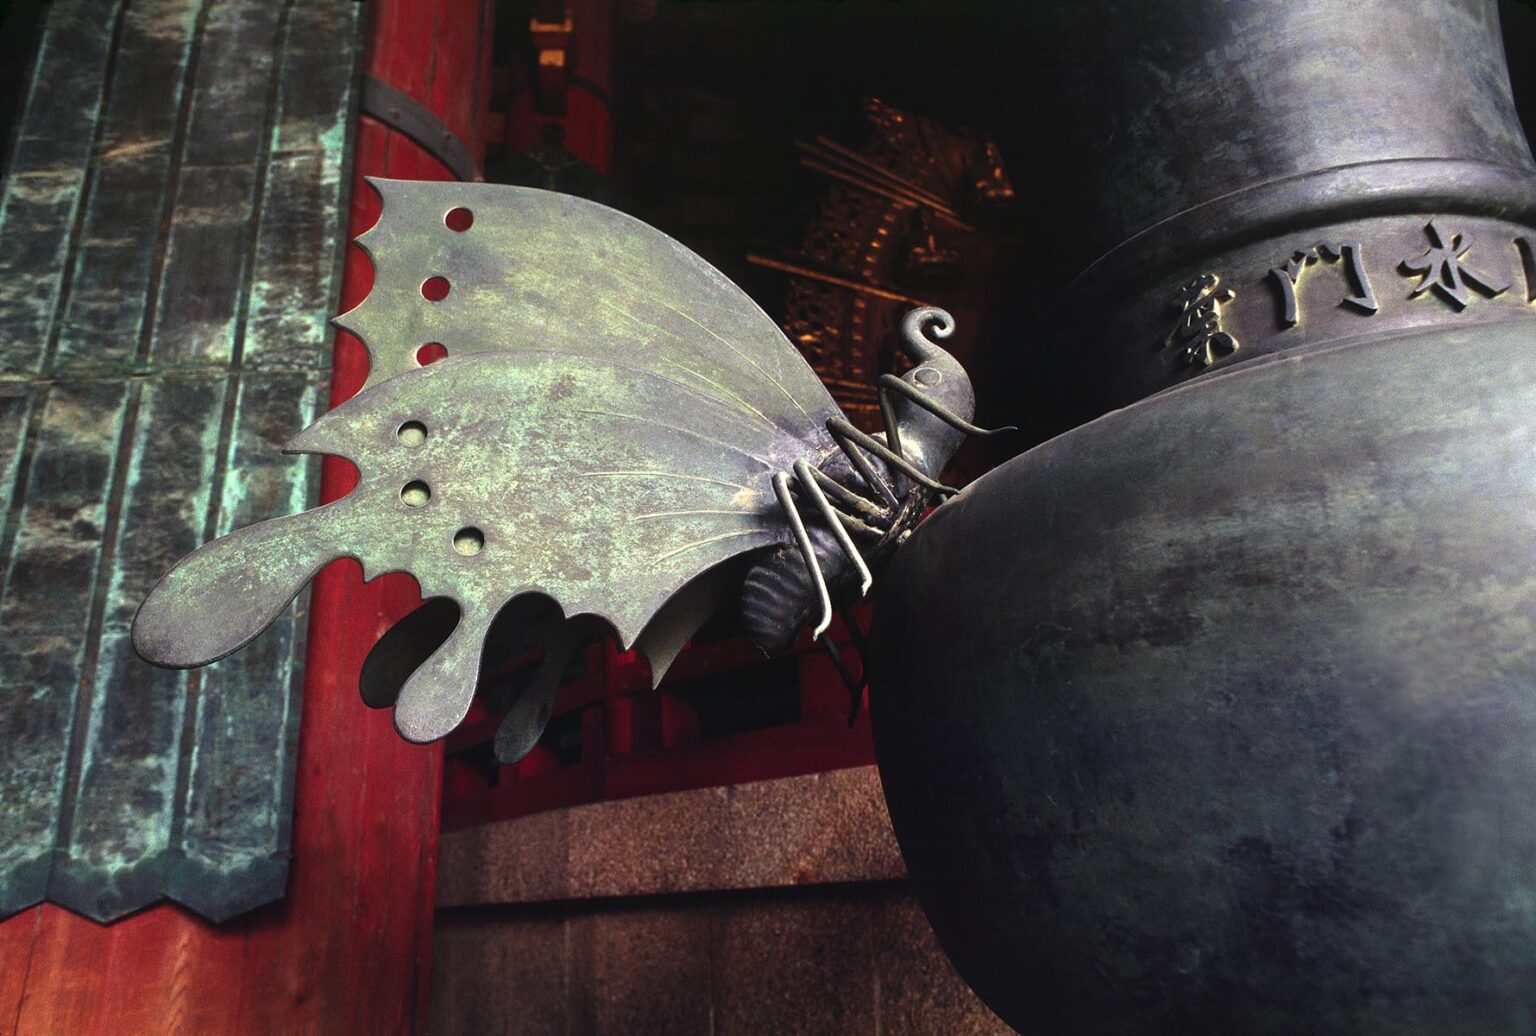 Metal MOTH inside TODAIJI TEMPLE, the largest wooden structure of its age in the world  - NARA, JAPAN